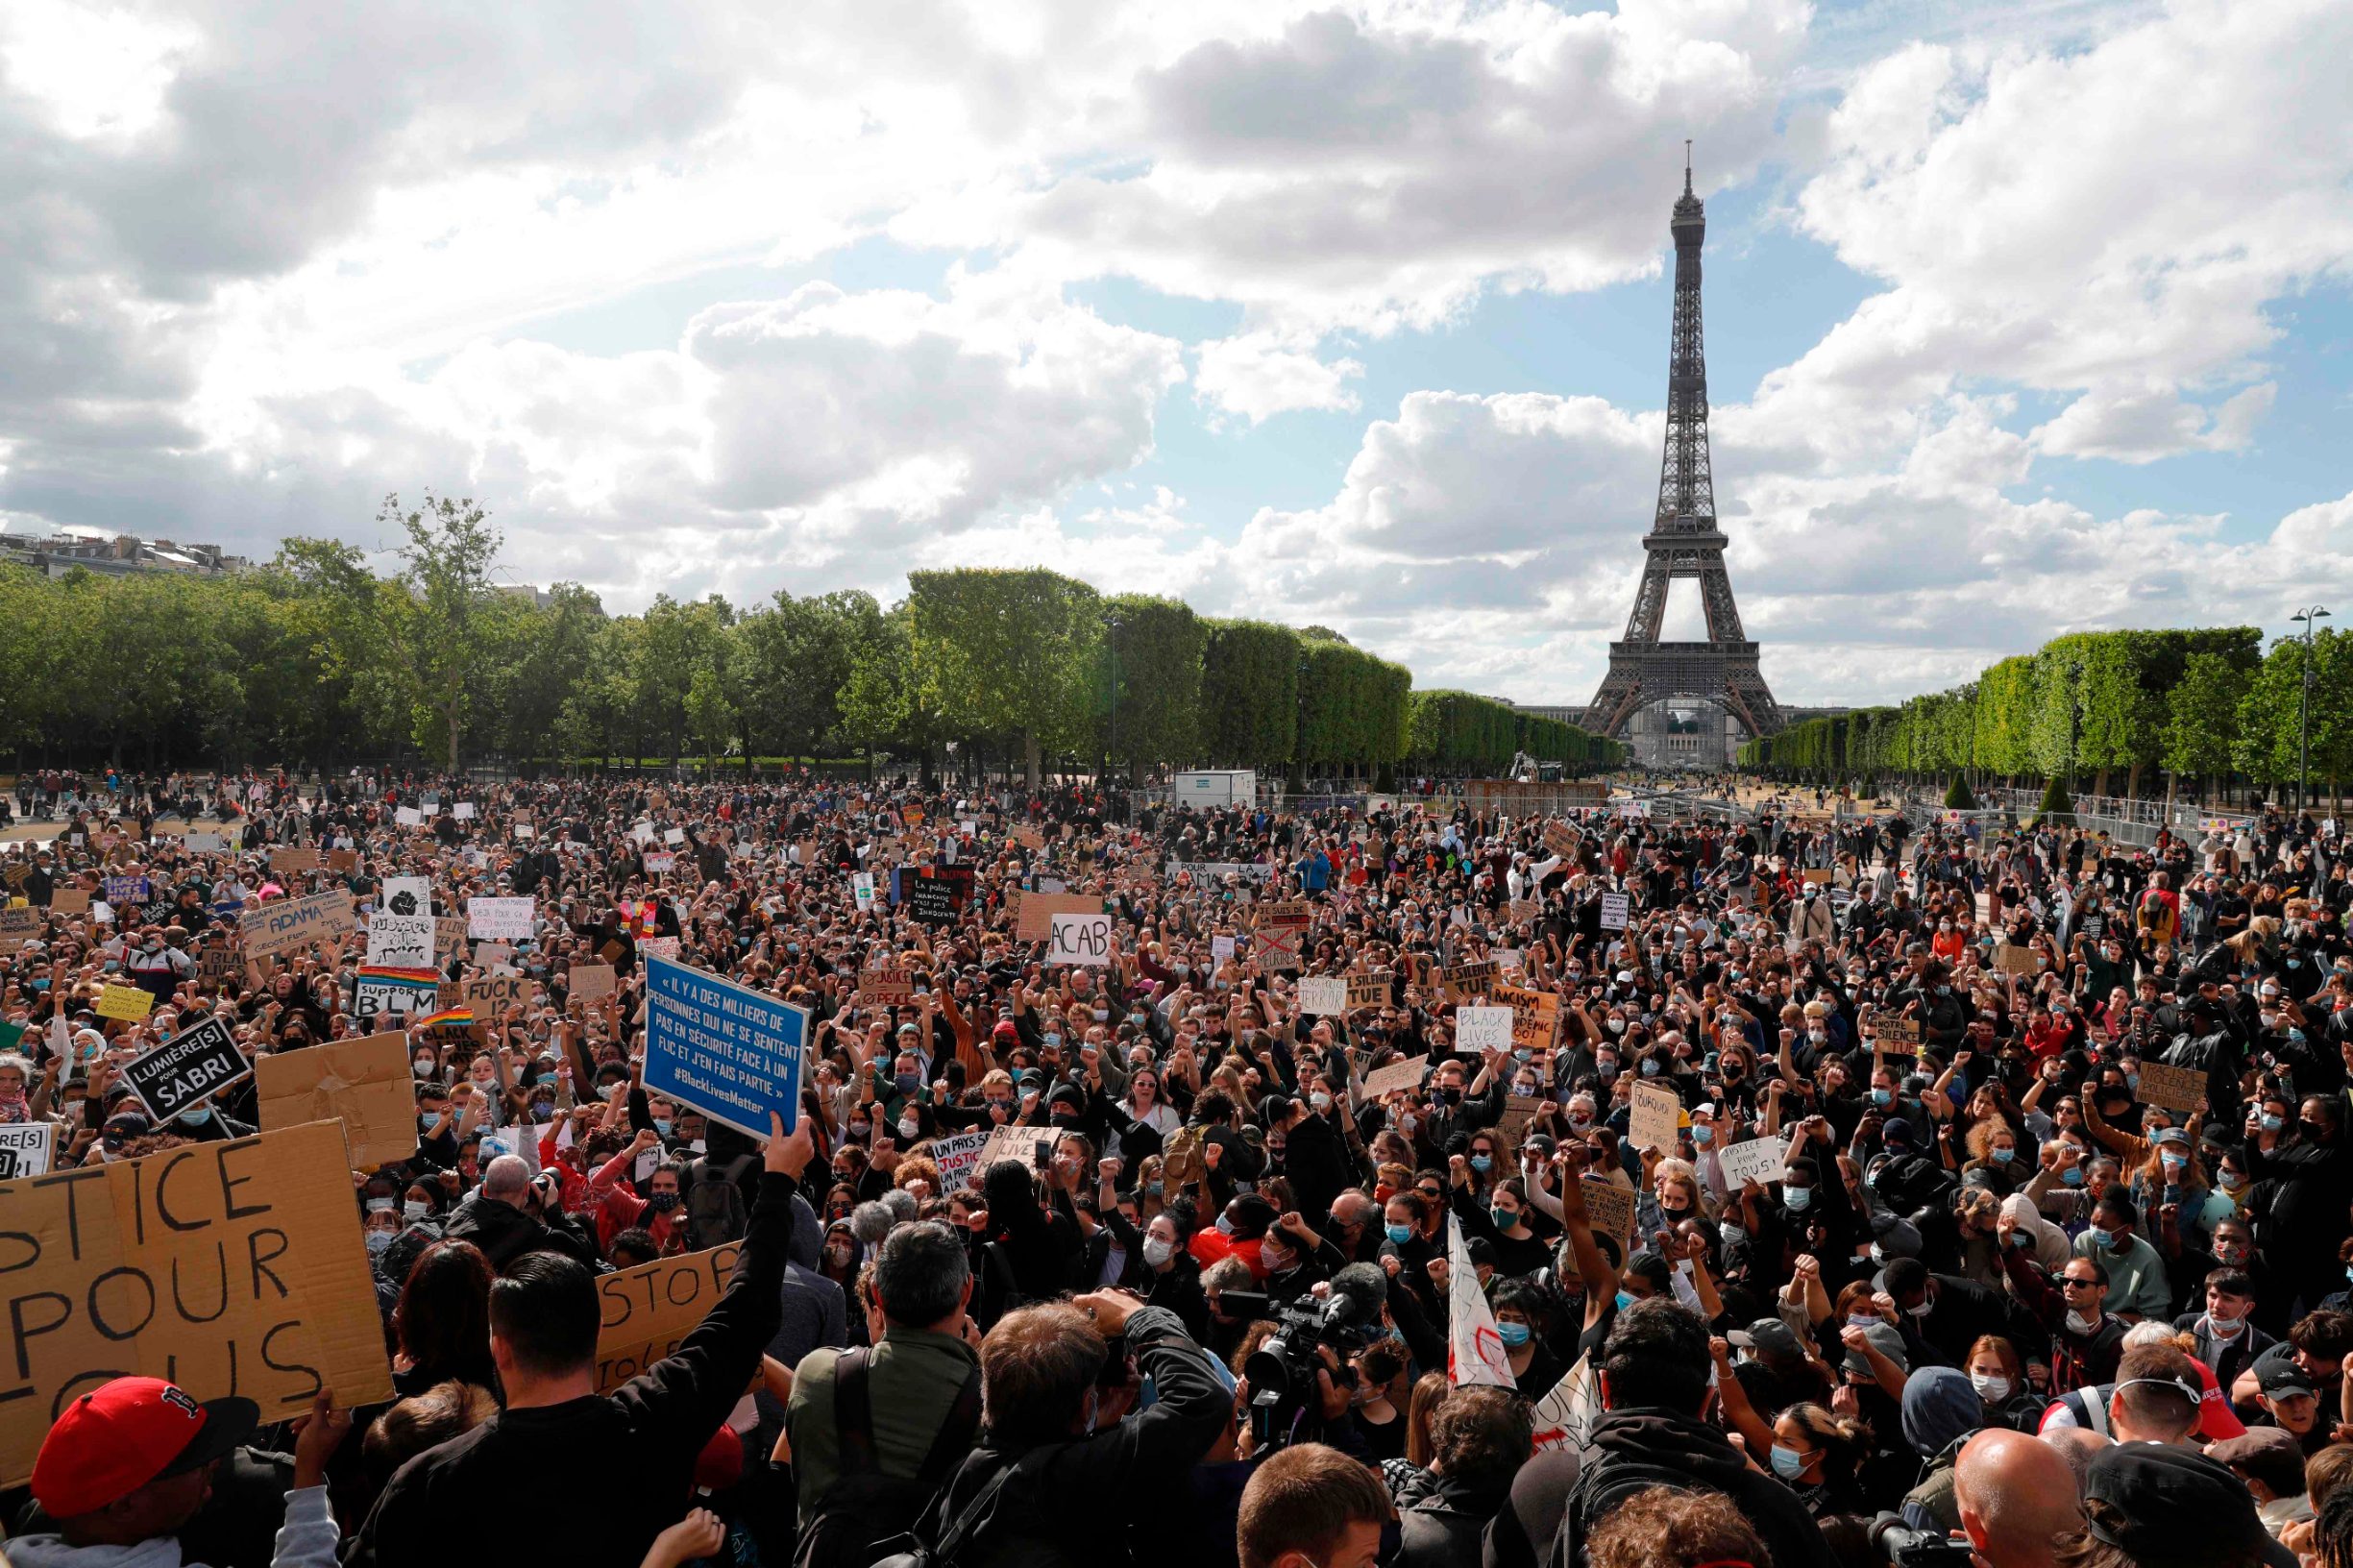 People gather on Champs de Mars in front of Eiffel Tower, in Paris on June 6, 2020, as part of 'Black Lives Matter' worldwide protests against racism and police brutality in the wake of the death of George Floyd, an unarmed black man killed while apprehended by police in Minneapolis, US. - Police banned the rally as well as a similar second one on the Champs de Mars park facing the Eiffel Tower today, saying the events were organised via social networks without official notice or consultation. But on June 2, another banned rally in Paris drew more than 20000 people in support of the family of Adama Traore, a young black man who died in police custody in 2016. (Photo by GEOFFROY VAN DER HASSELT / AFP)